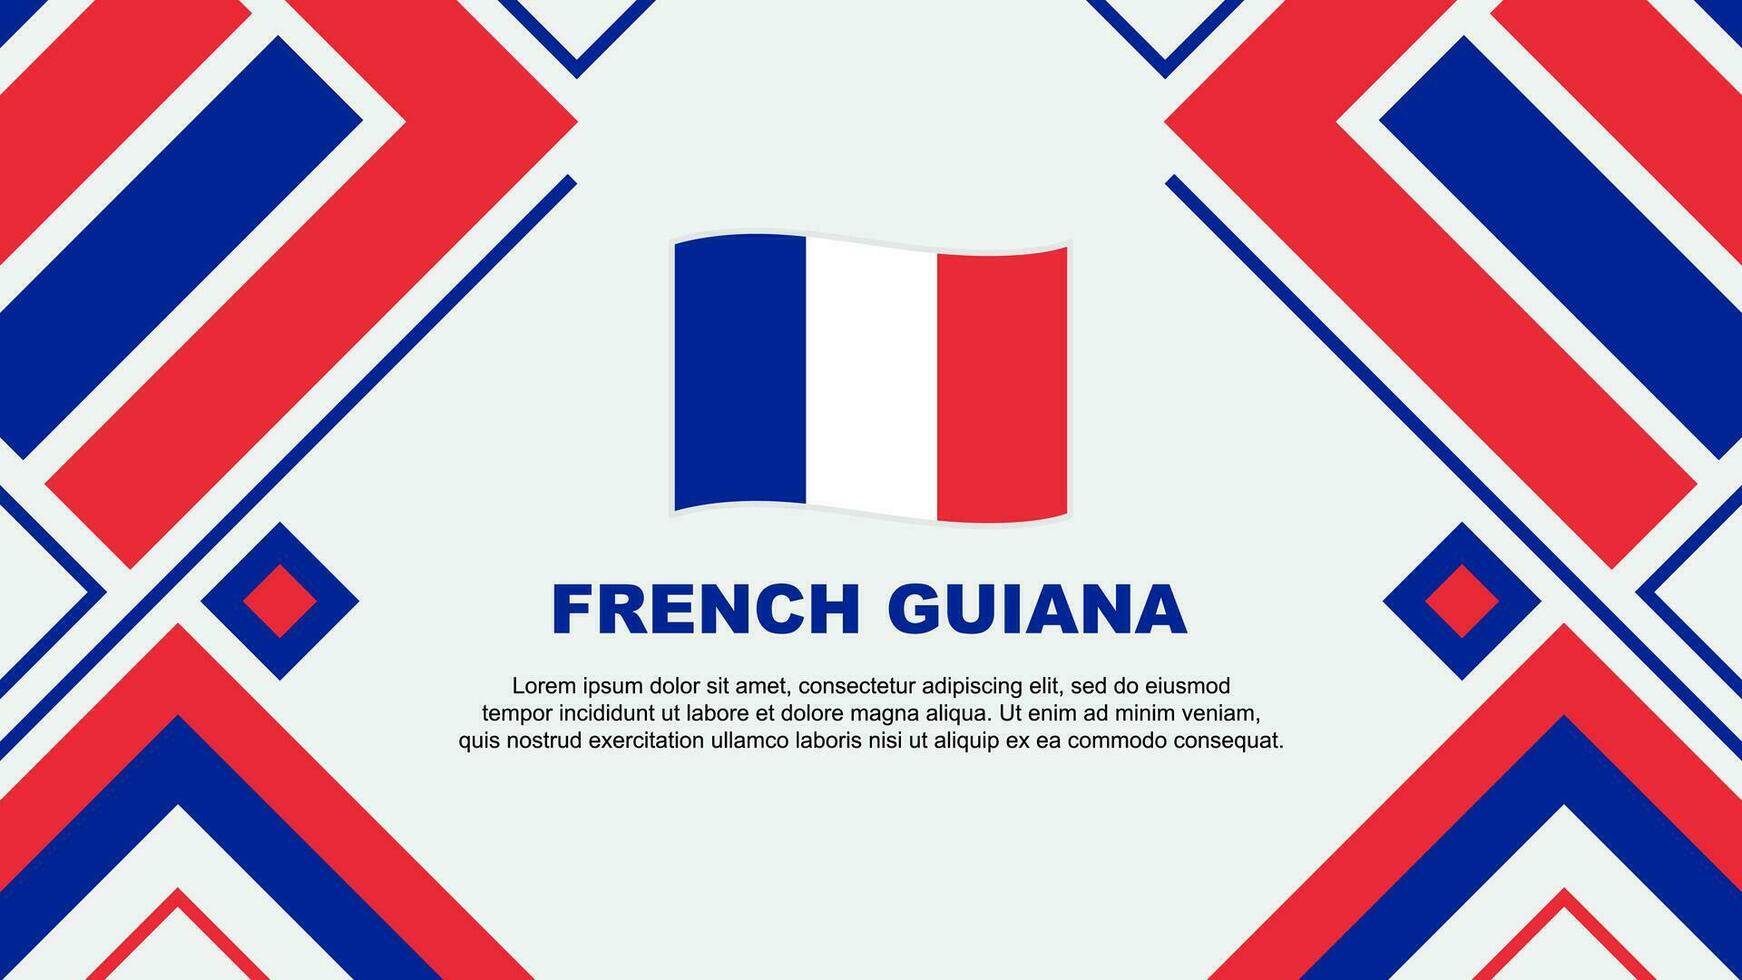 French Guiana Flag Abstract Background Design Template. French Guiana Independence Day Banner Wallpaper Vector Illustration. Flag